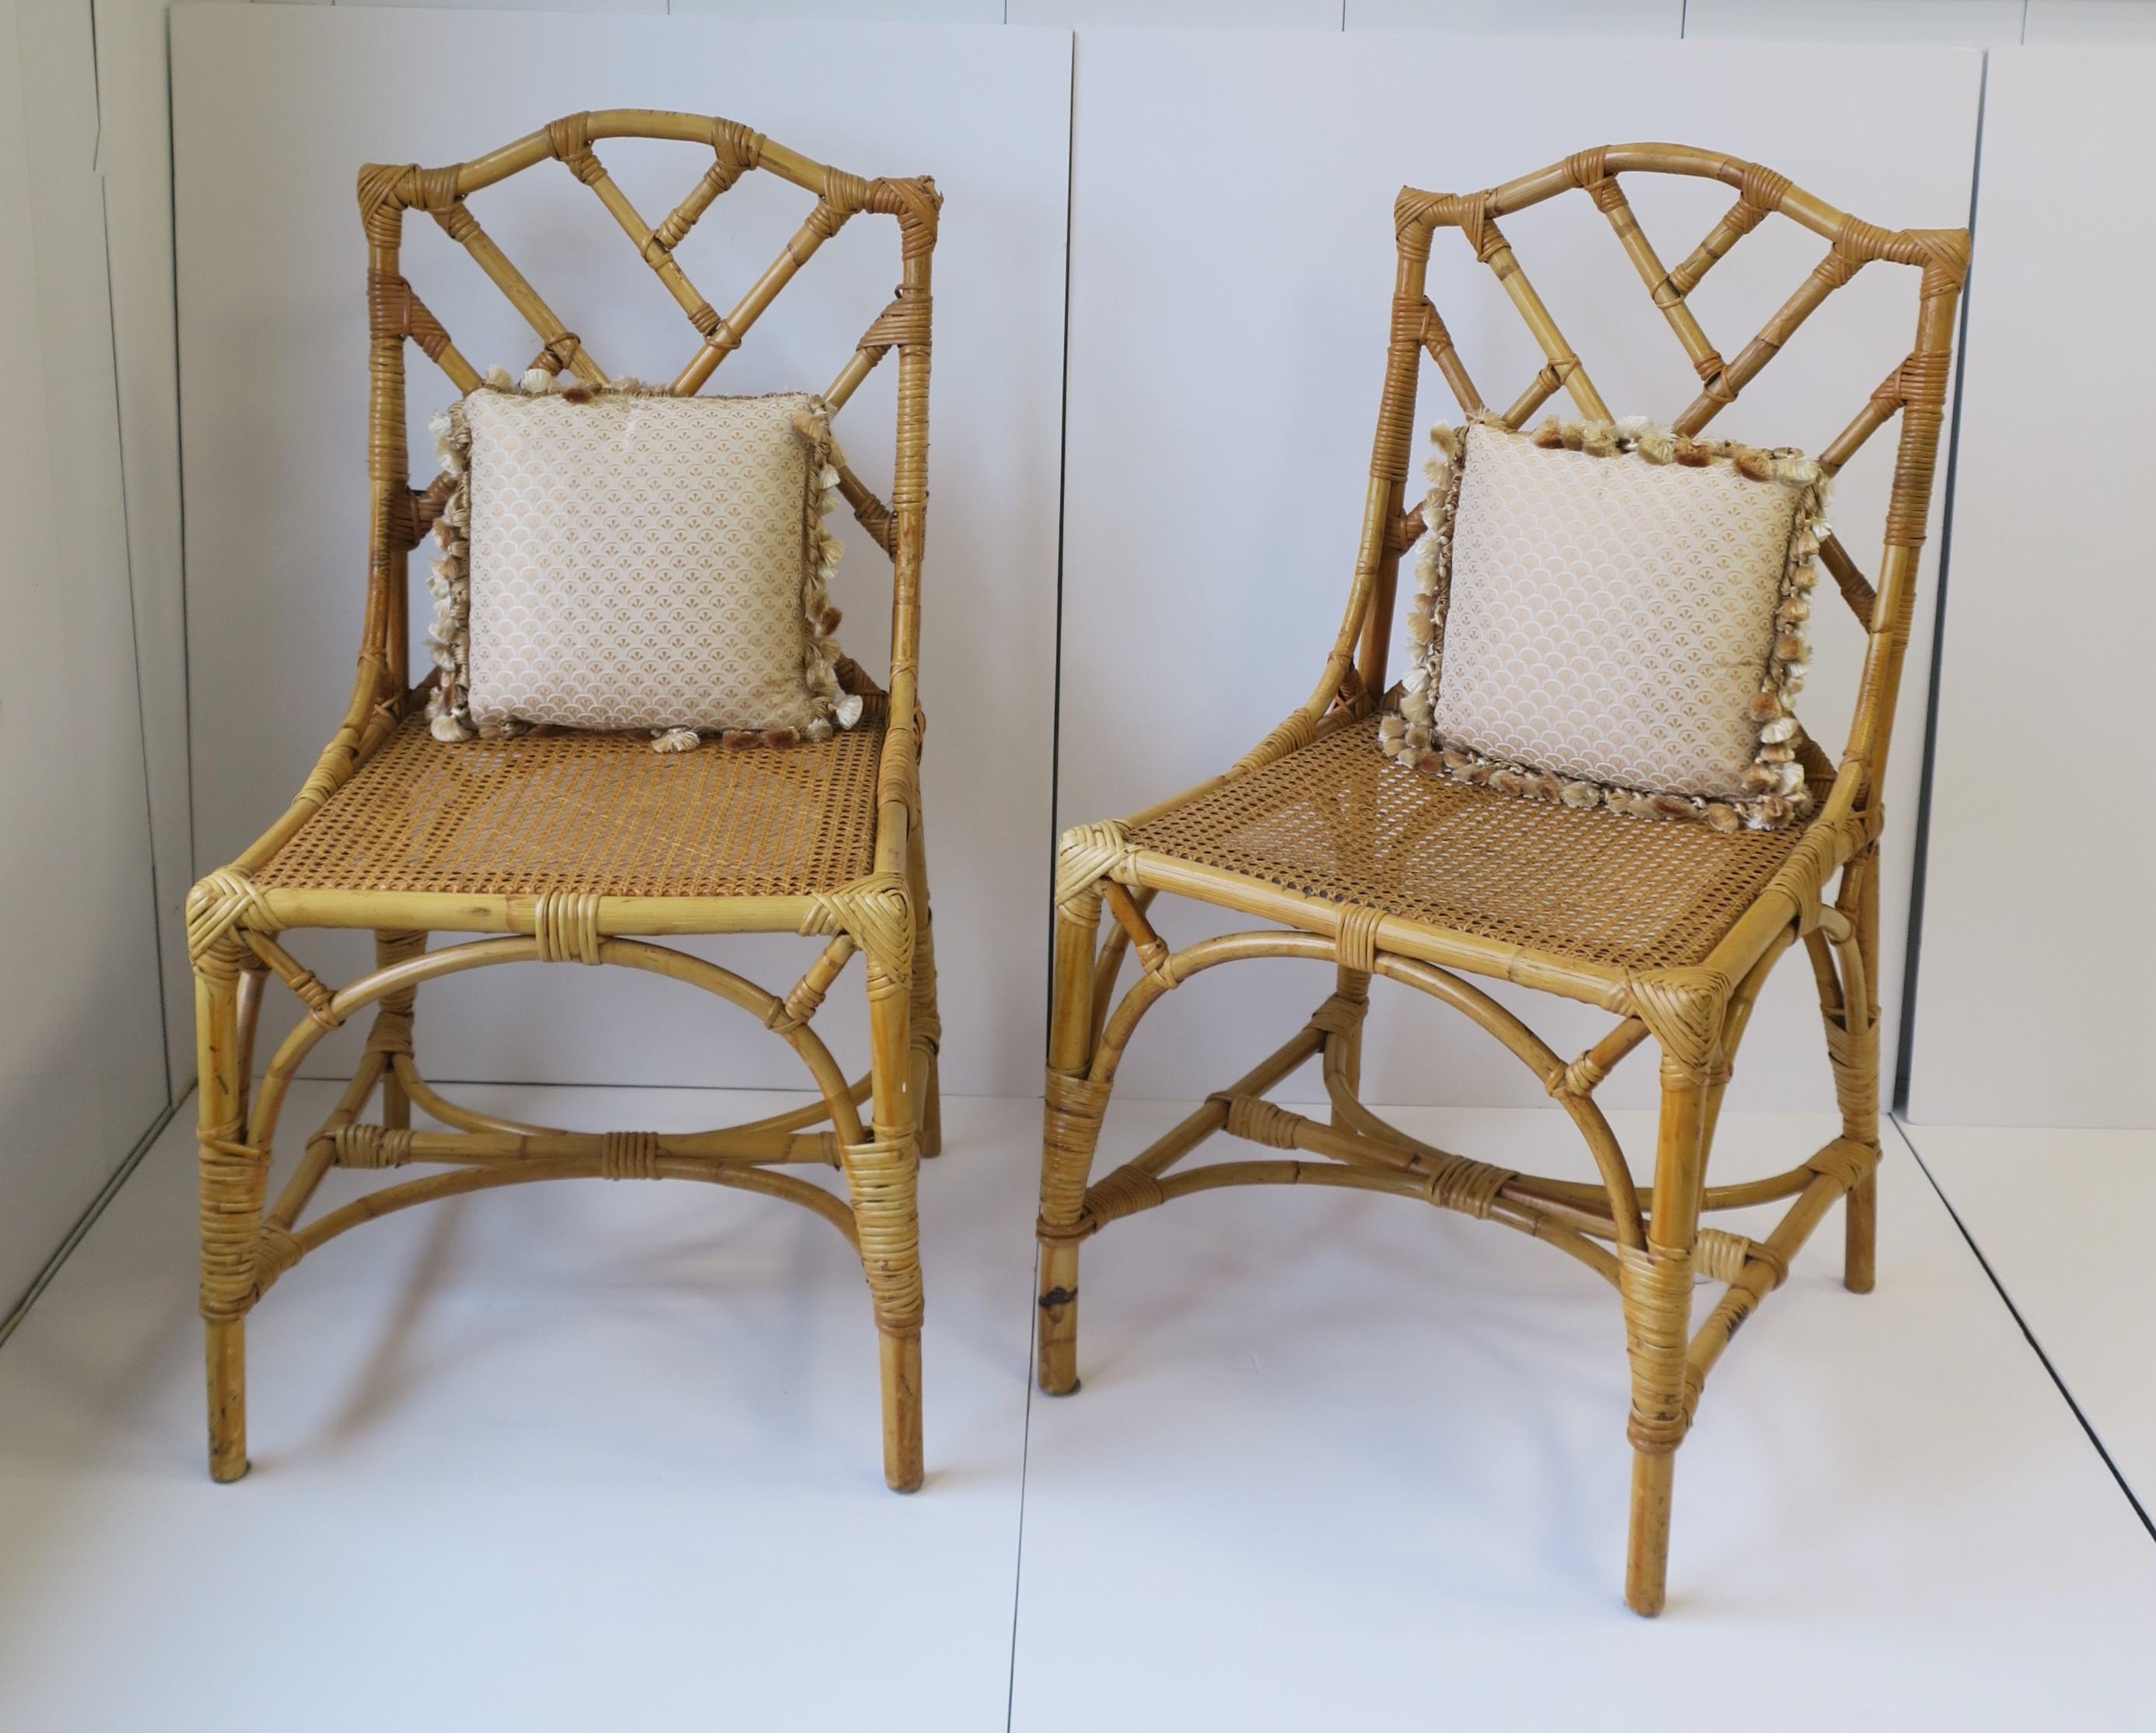 Chippendale Designer Italian Cane and Bamboo Wicker Rattan Side Chairs, Pair